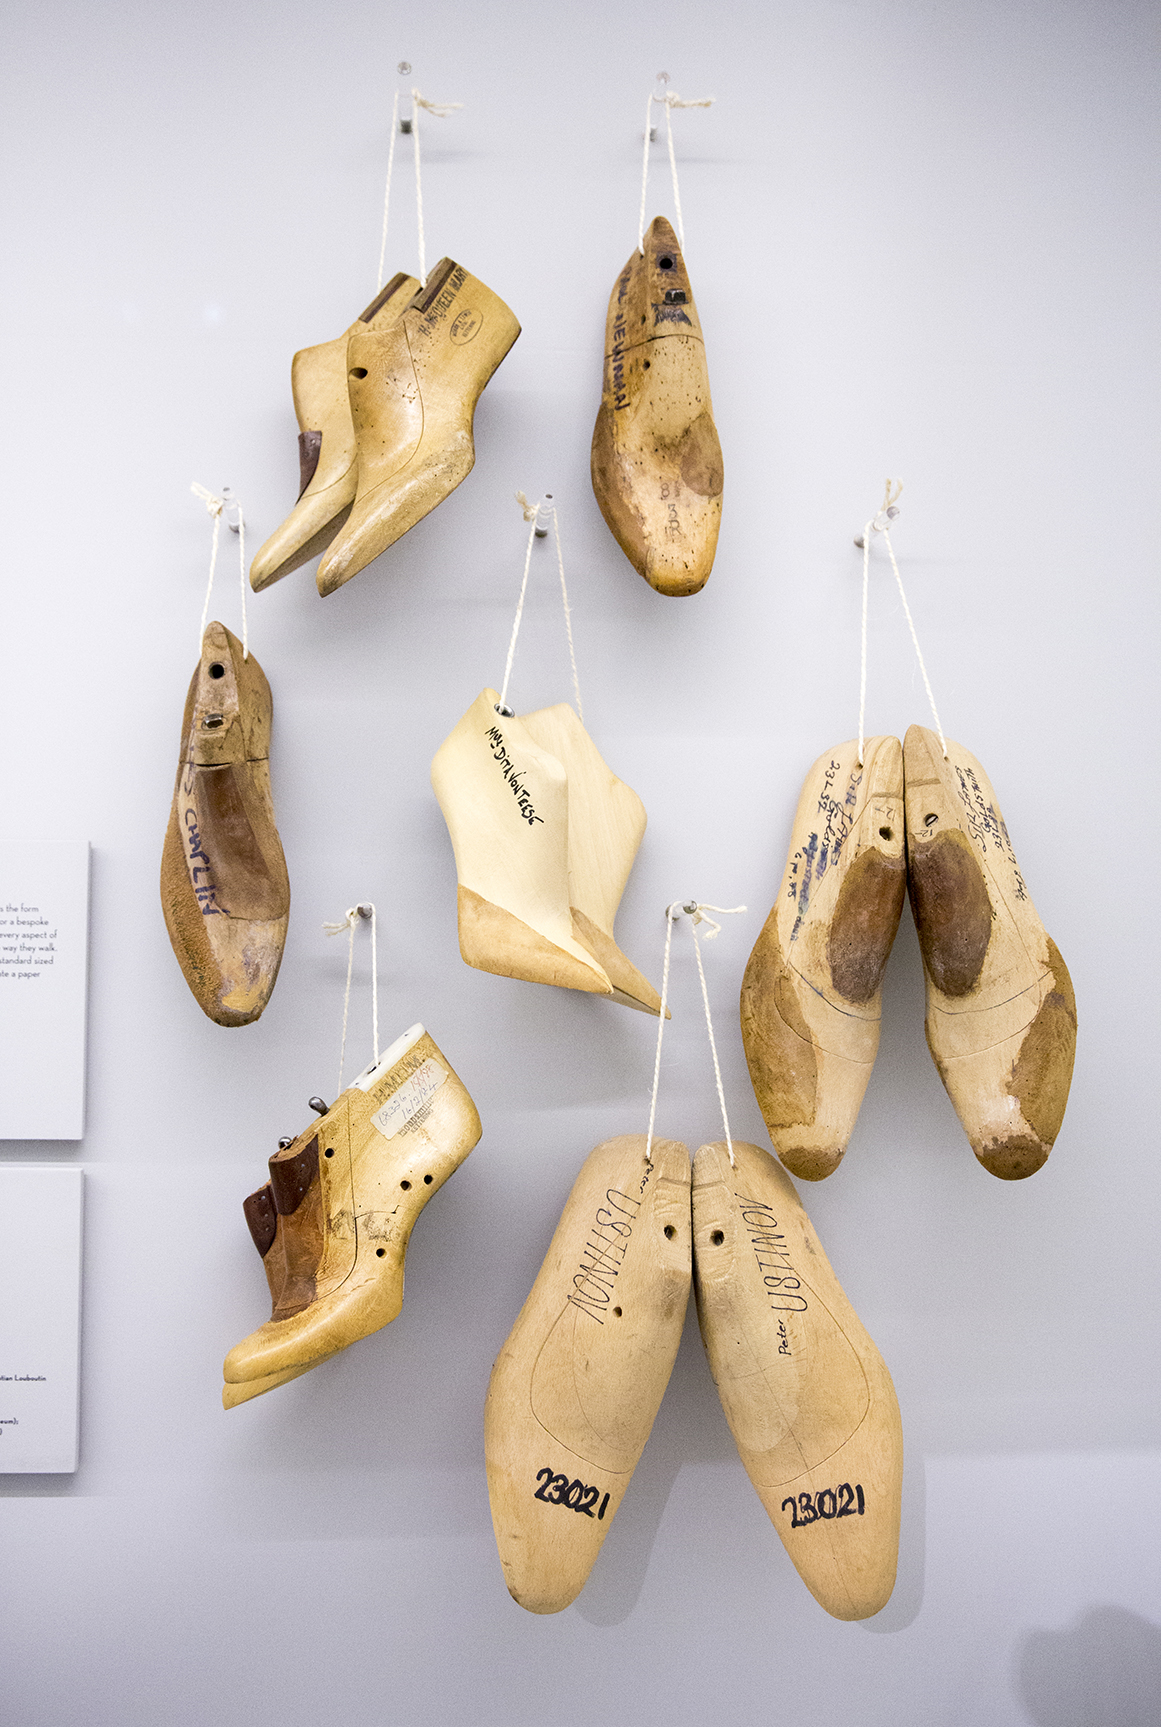 12._Installation_view_of_Shoes_Pleasure_and_Pain_13_June_2015_-_31_January_2016_c_Victoria_and_Albert_Museum_London